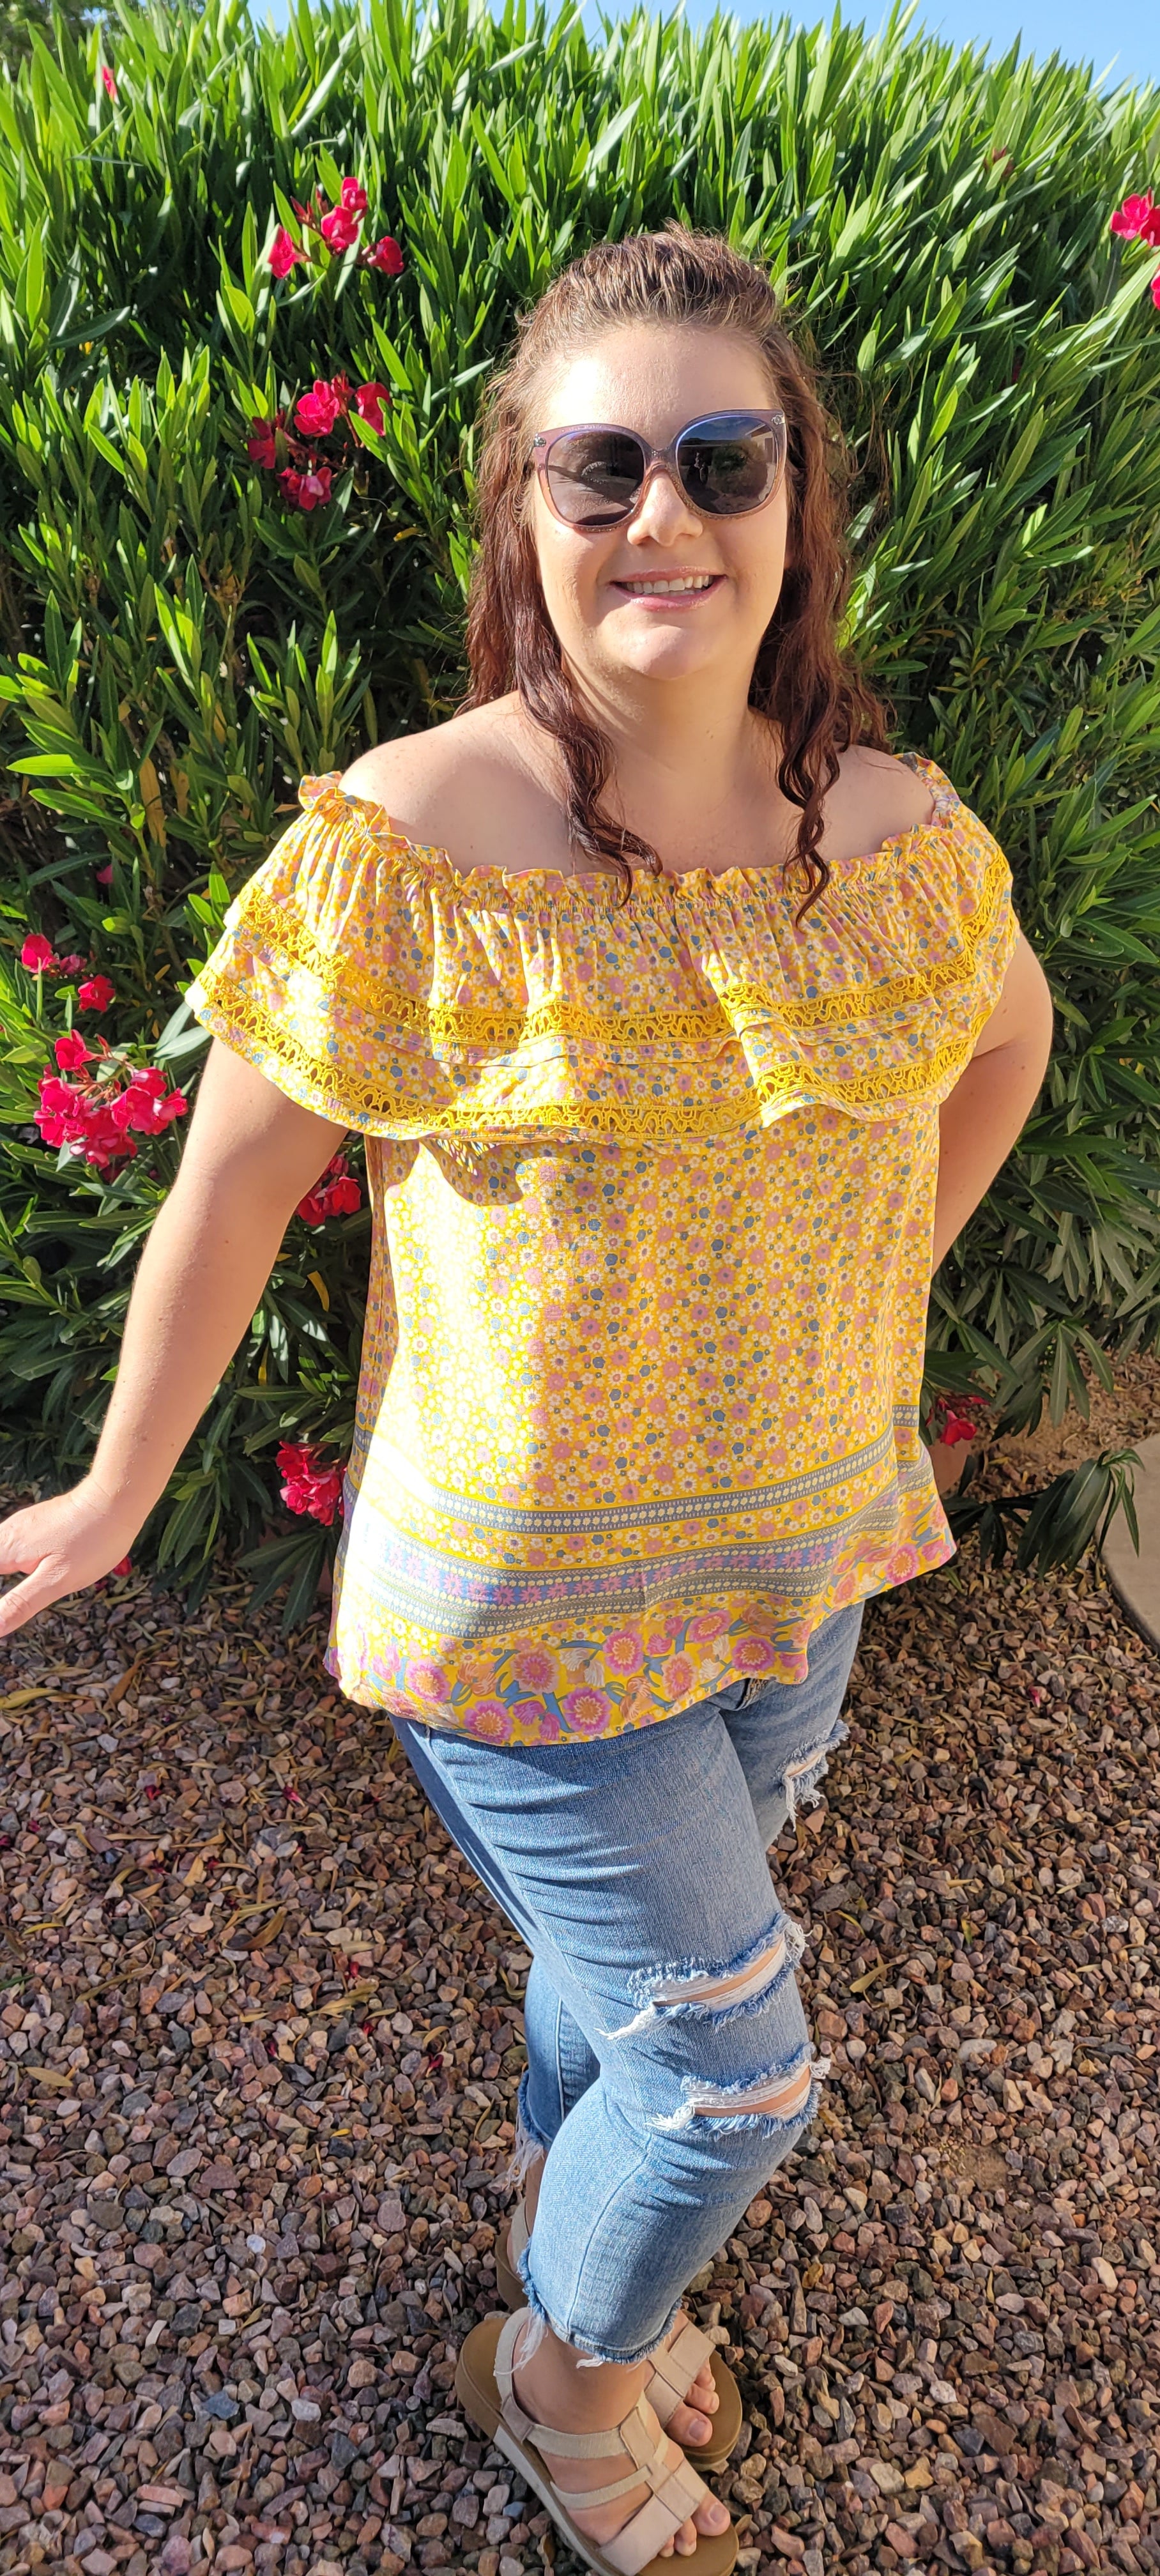 “Sunshine On My Shoulders” is an off the shoulder smock top. This top features a ray of subdued colors (dandelion yellow, mauve, ceil blue, white), elastic ruffled neckline, and crochet lace design. This top is a longer length, it does not have stretch, and is super lightweight and breathable. Sizes small through large.